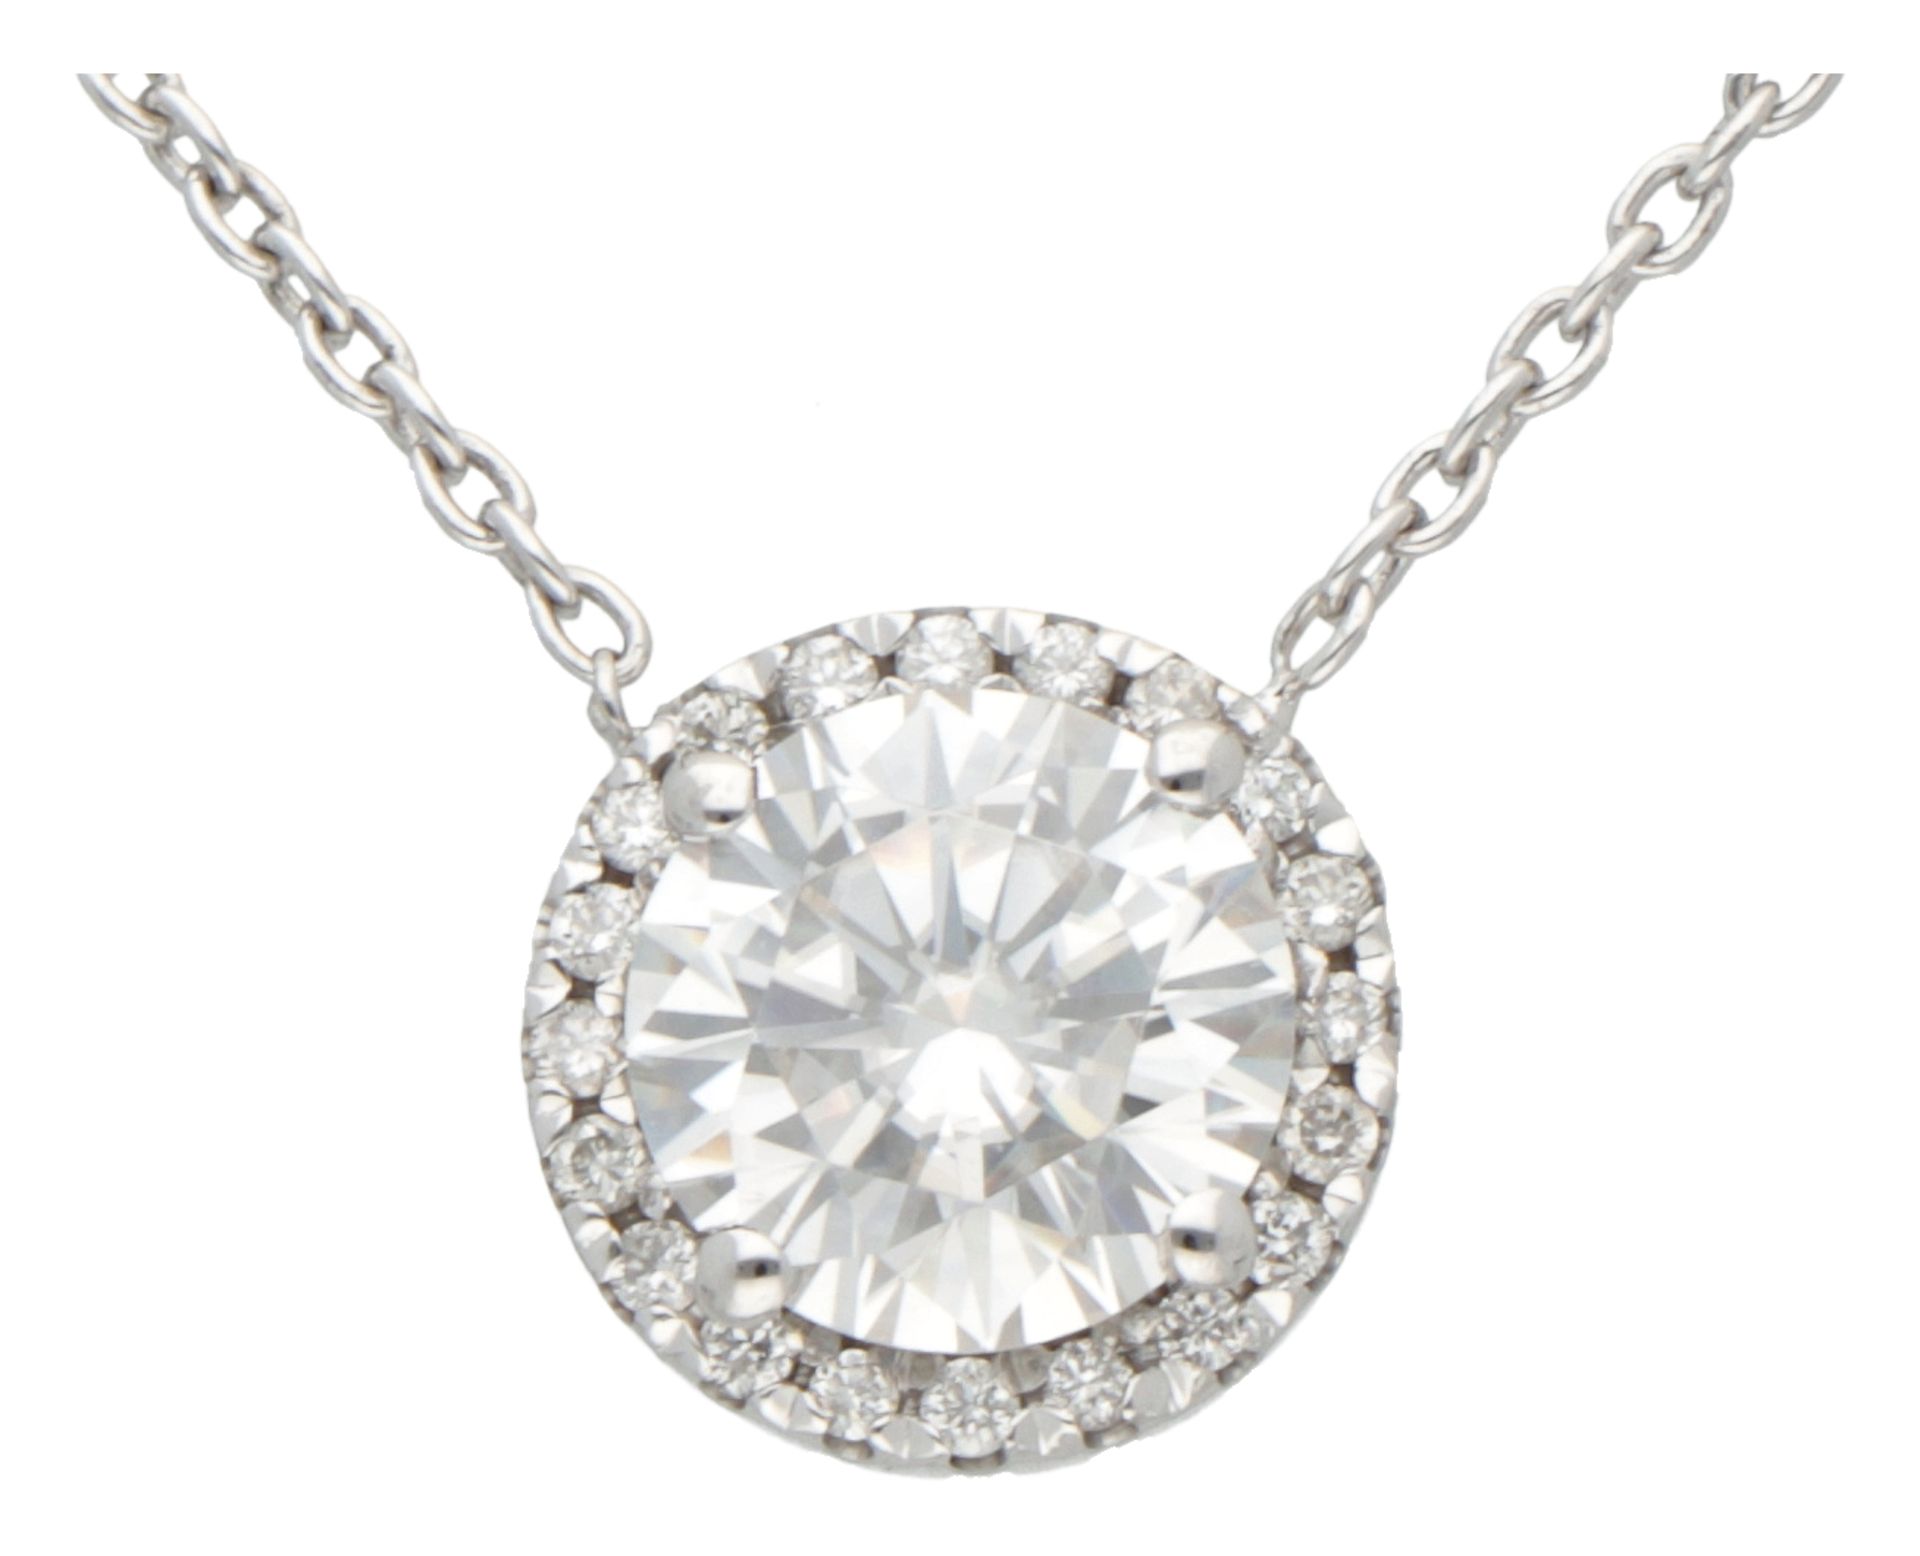 18K White gold necklace with halo pendant set with moissanite and simili. - Image 2 of 3